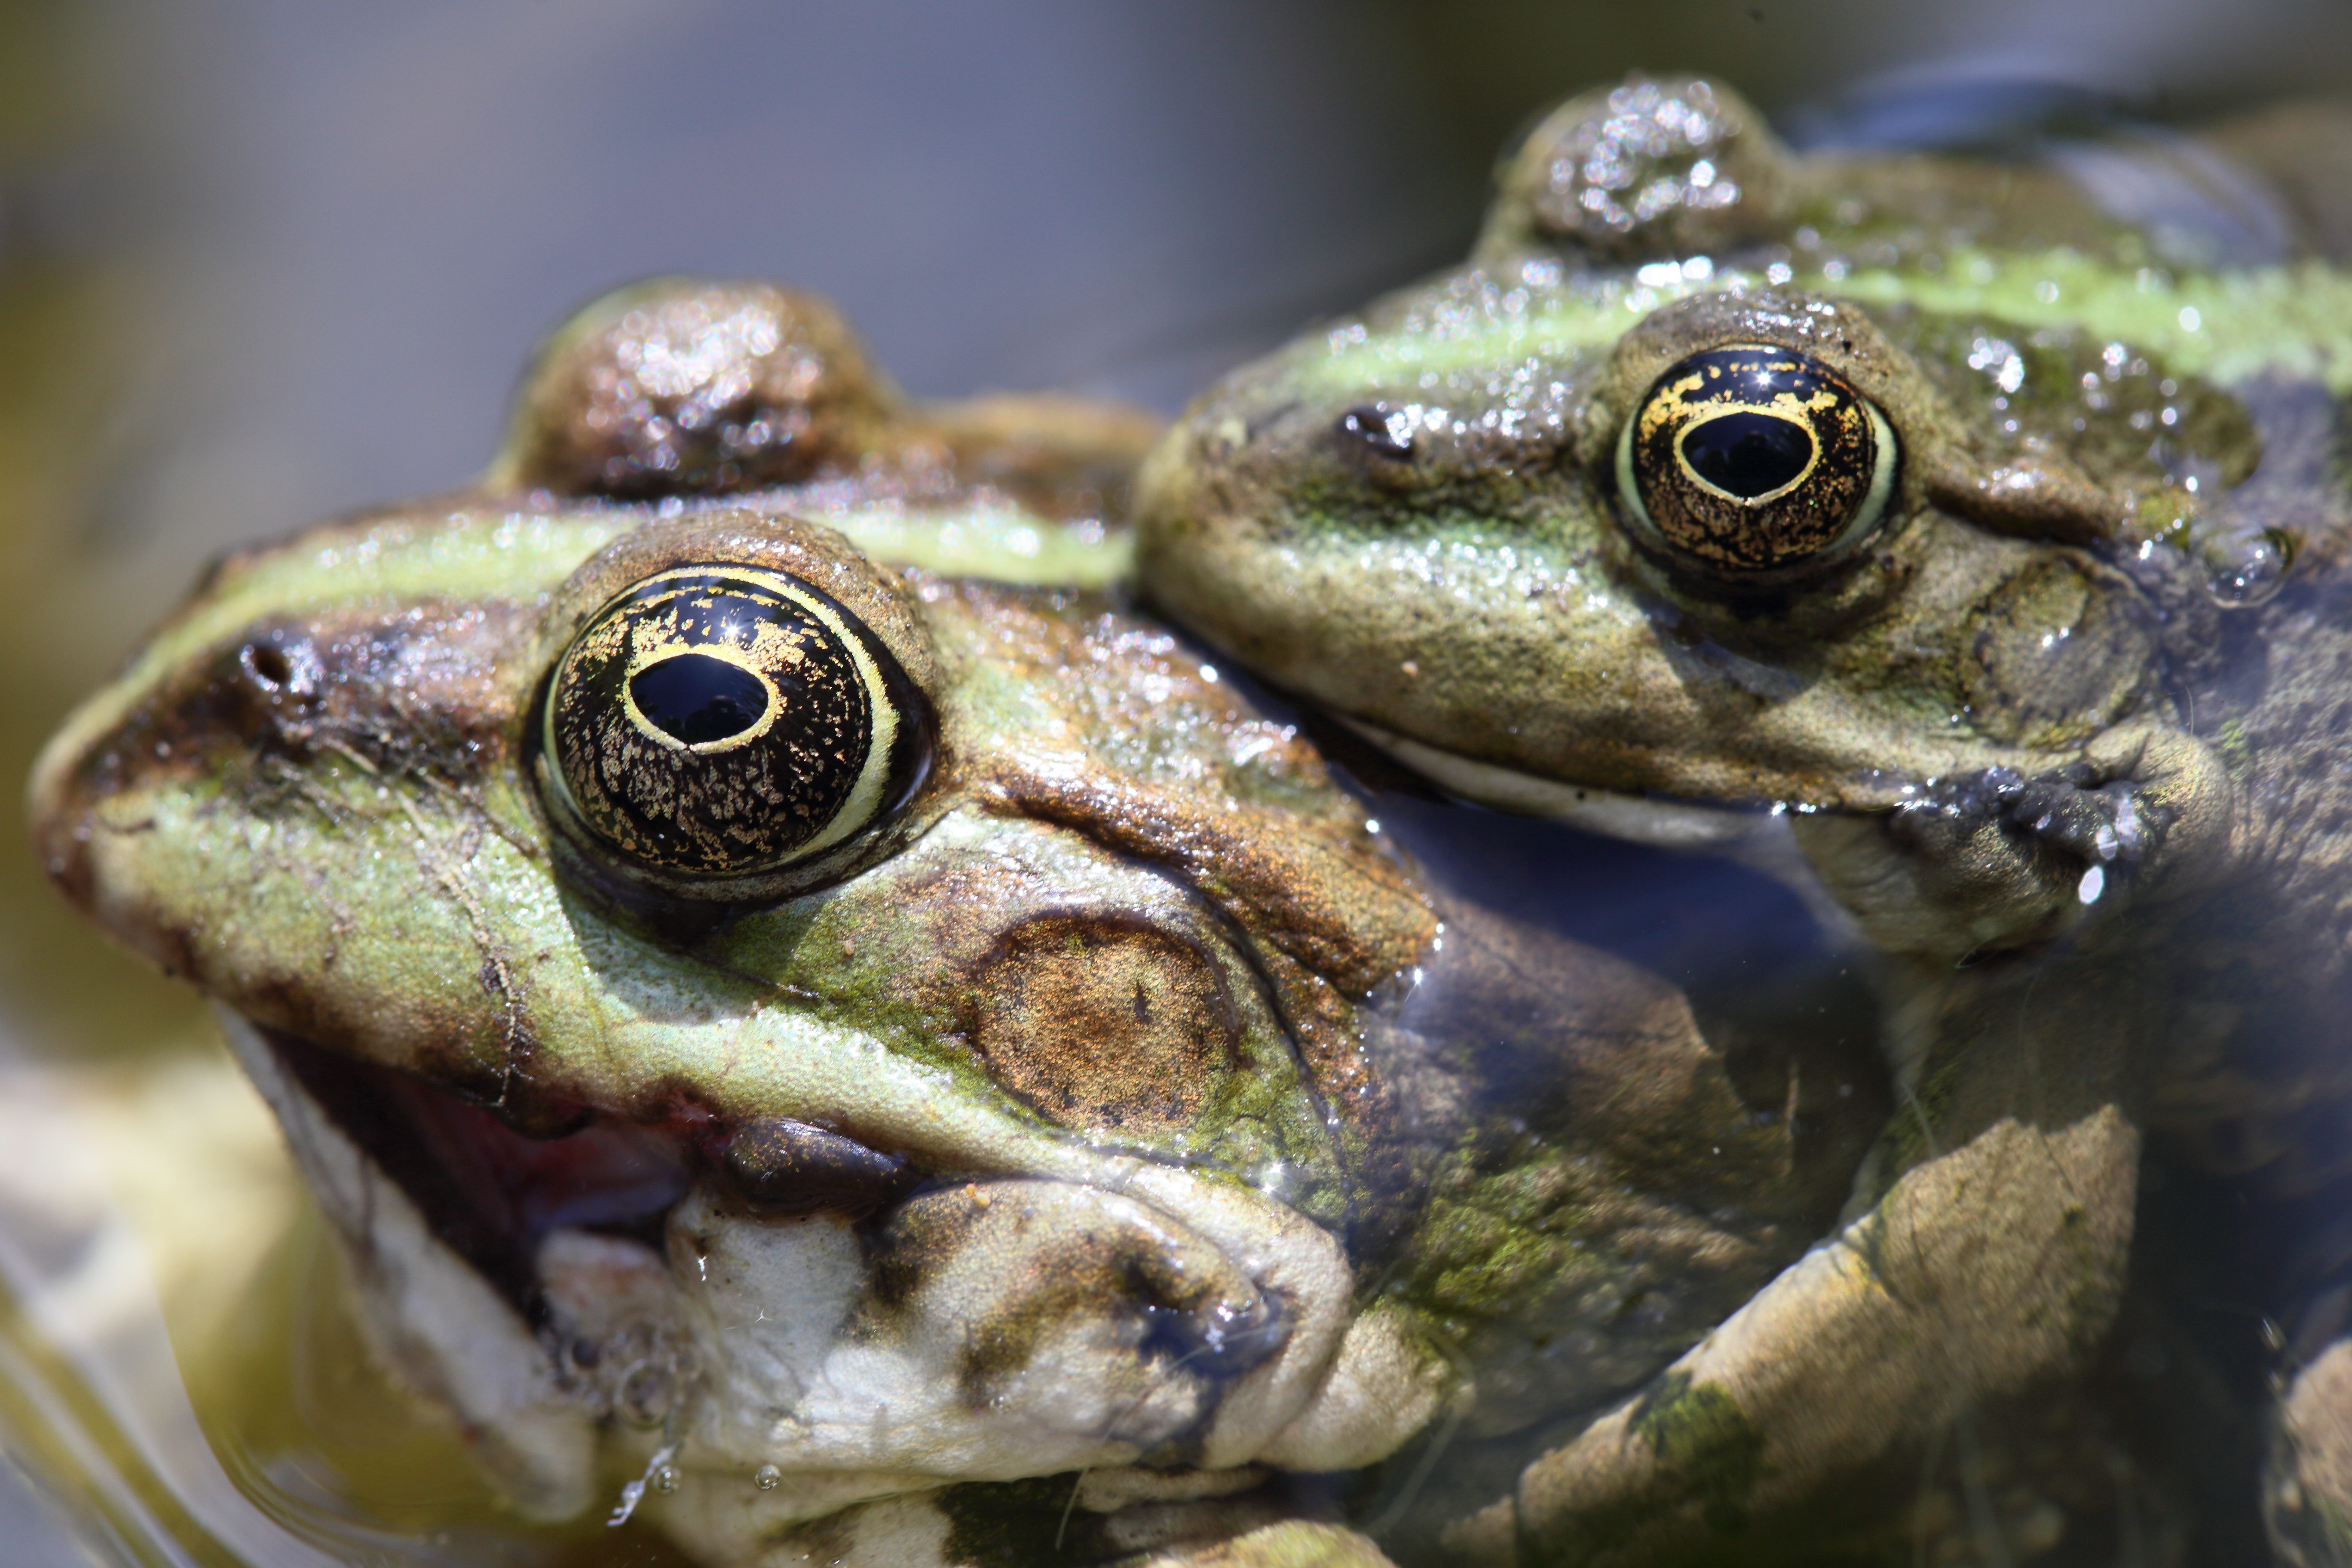 Close up of two green frogs, one on top of the other